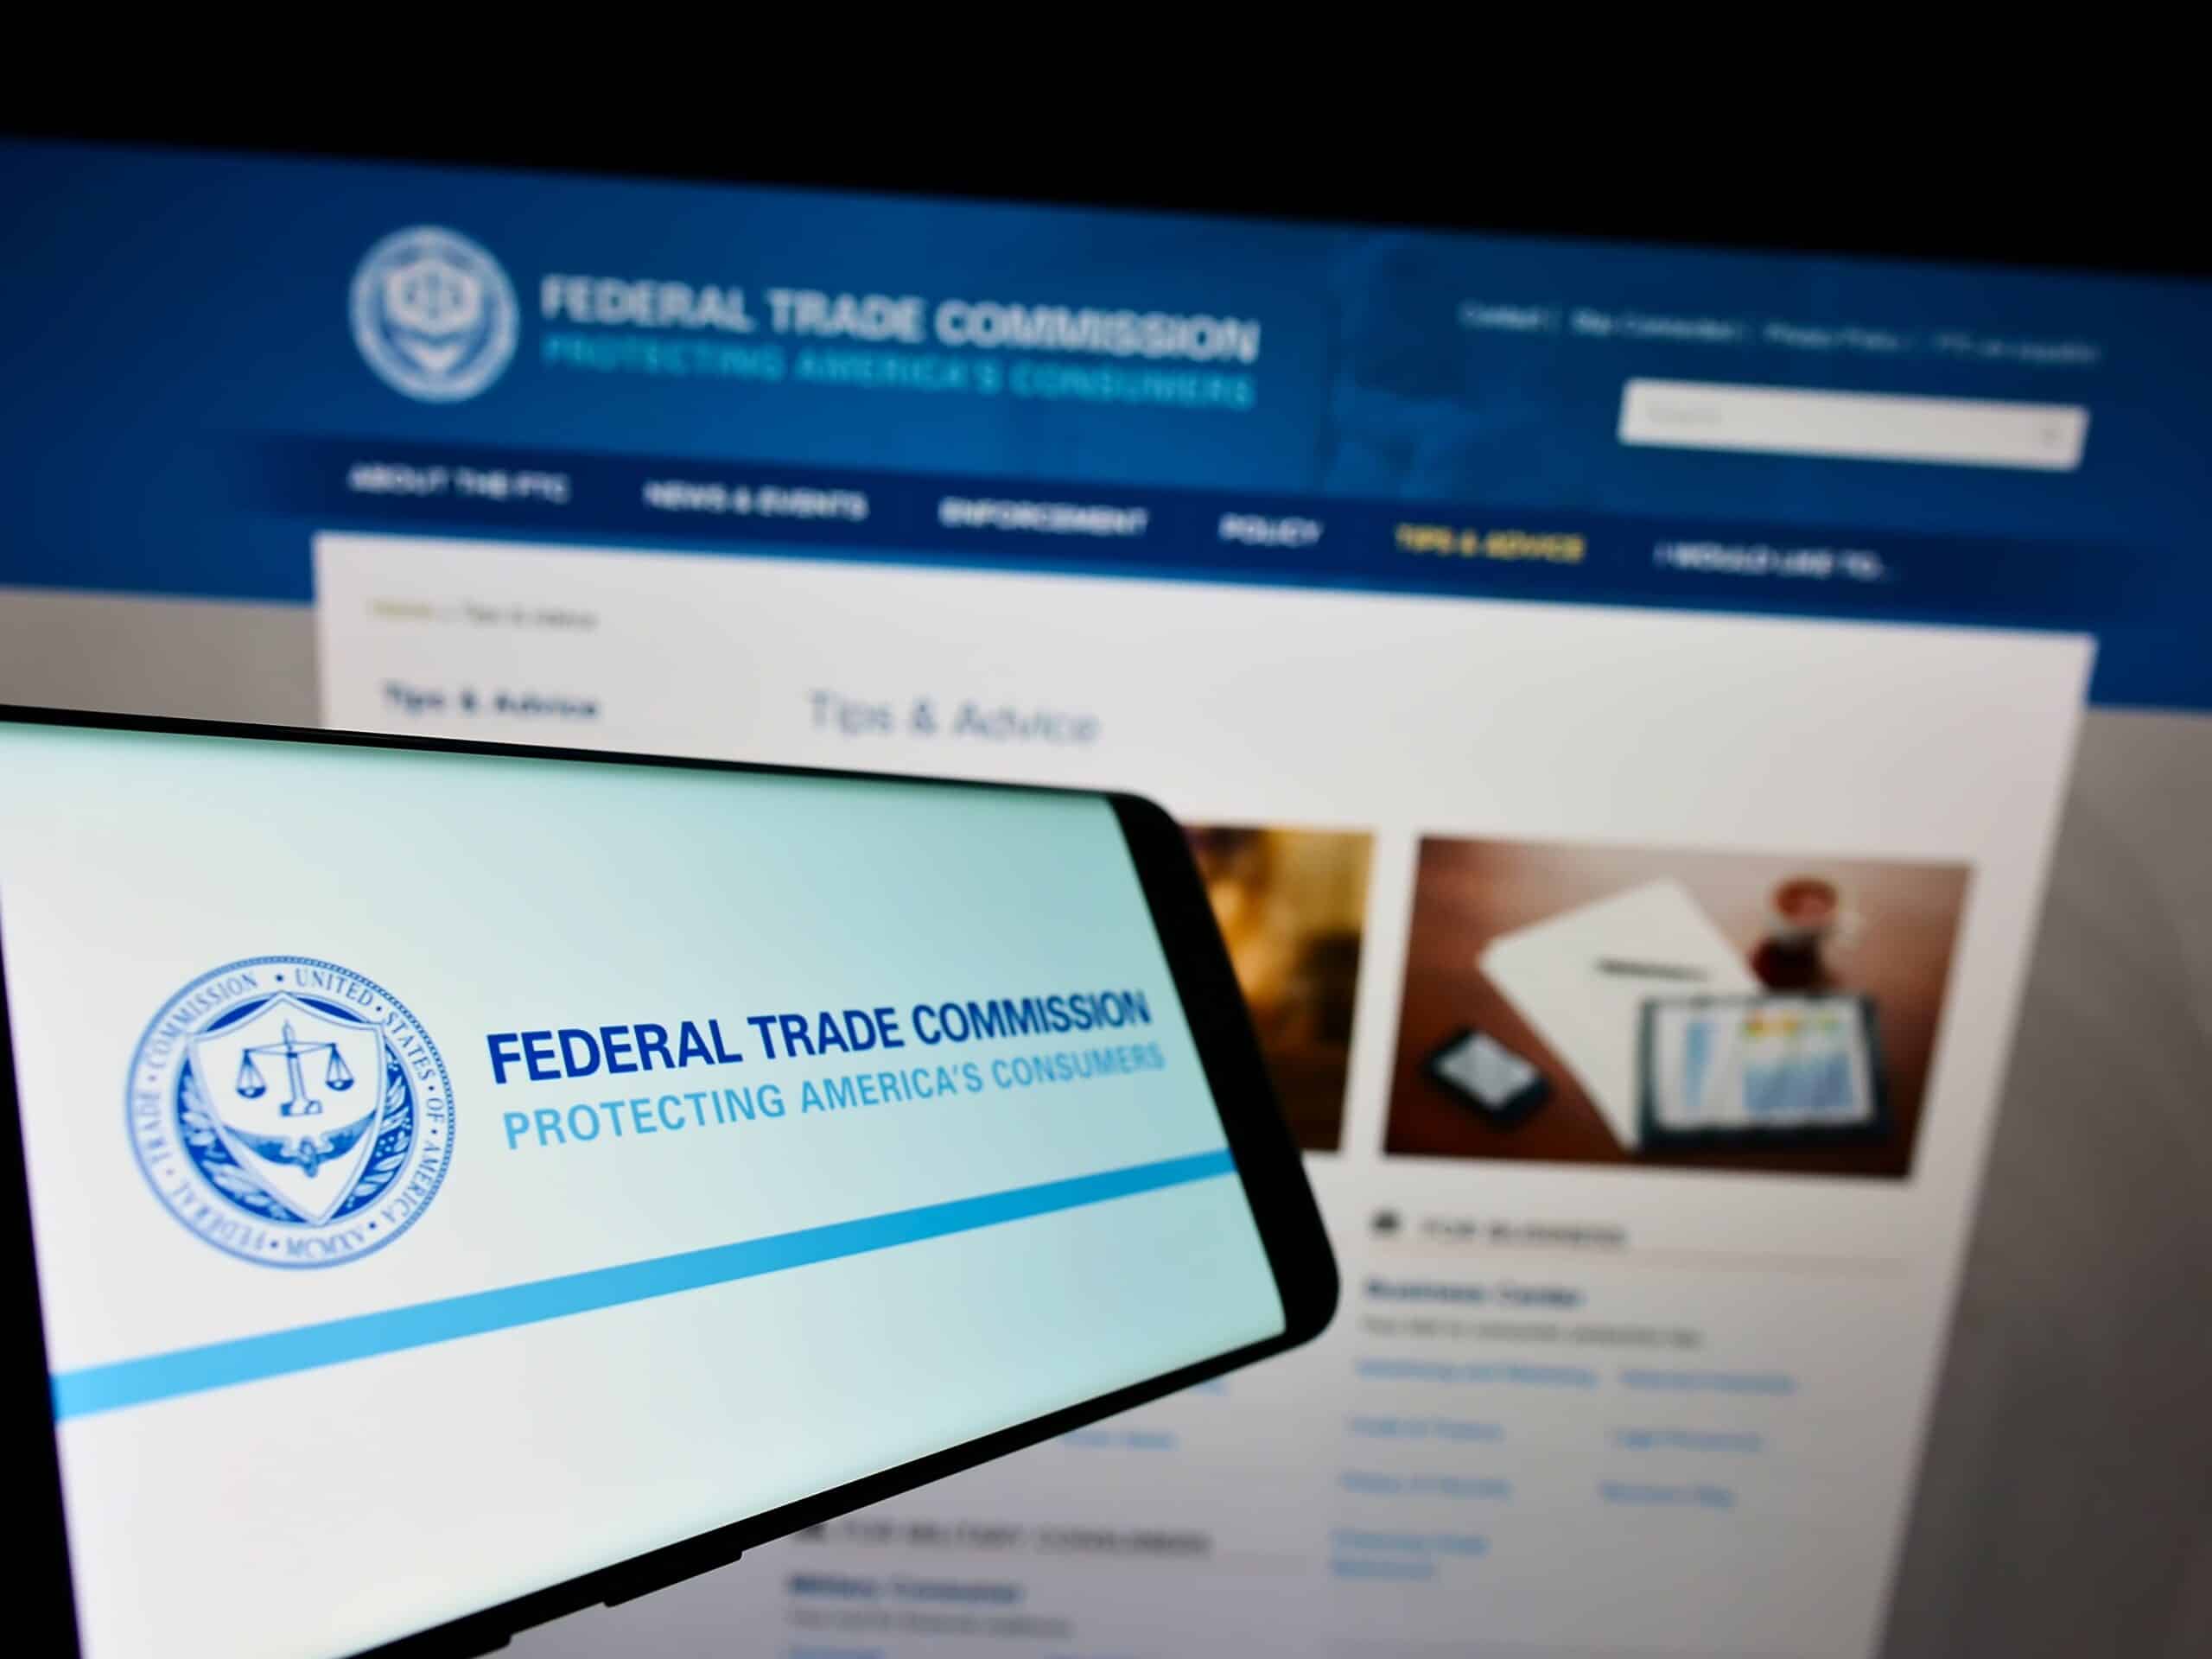  Smartphone with logo of US government agency Federal Trade Commission (FTC) on screen in front of website